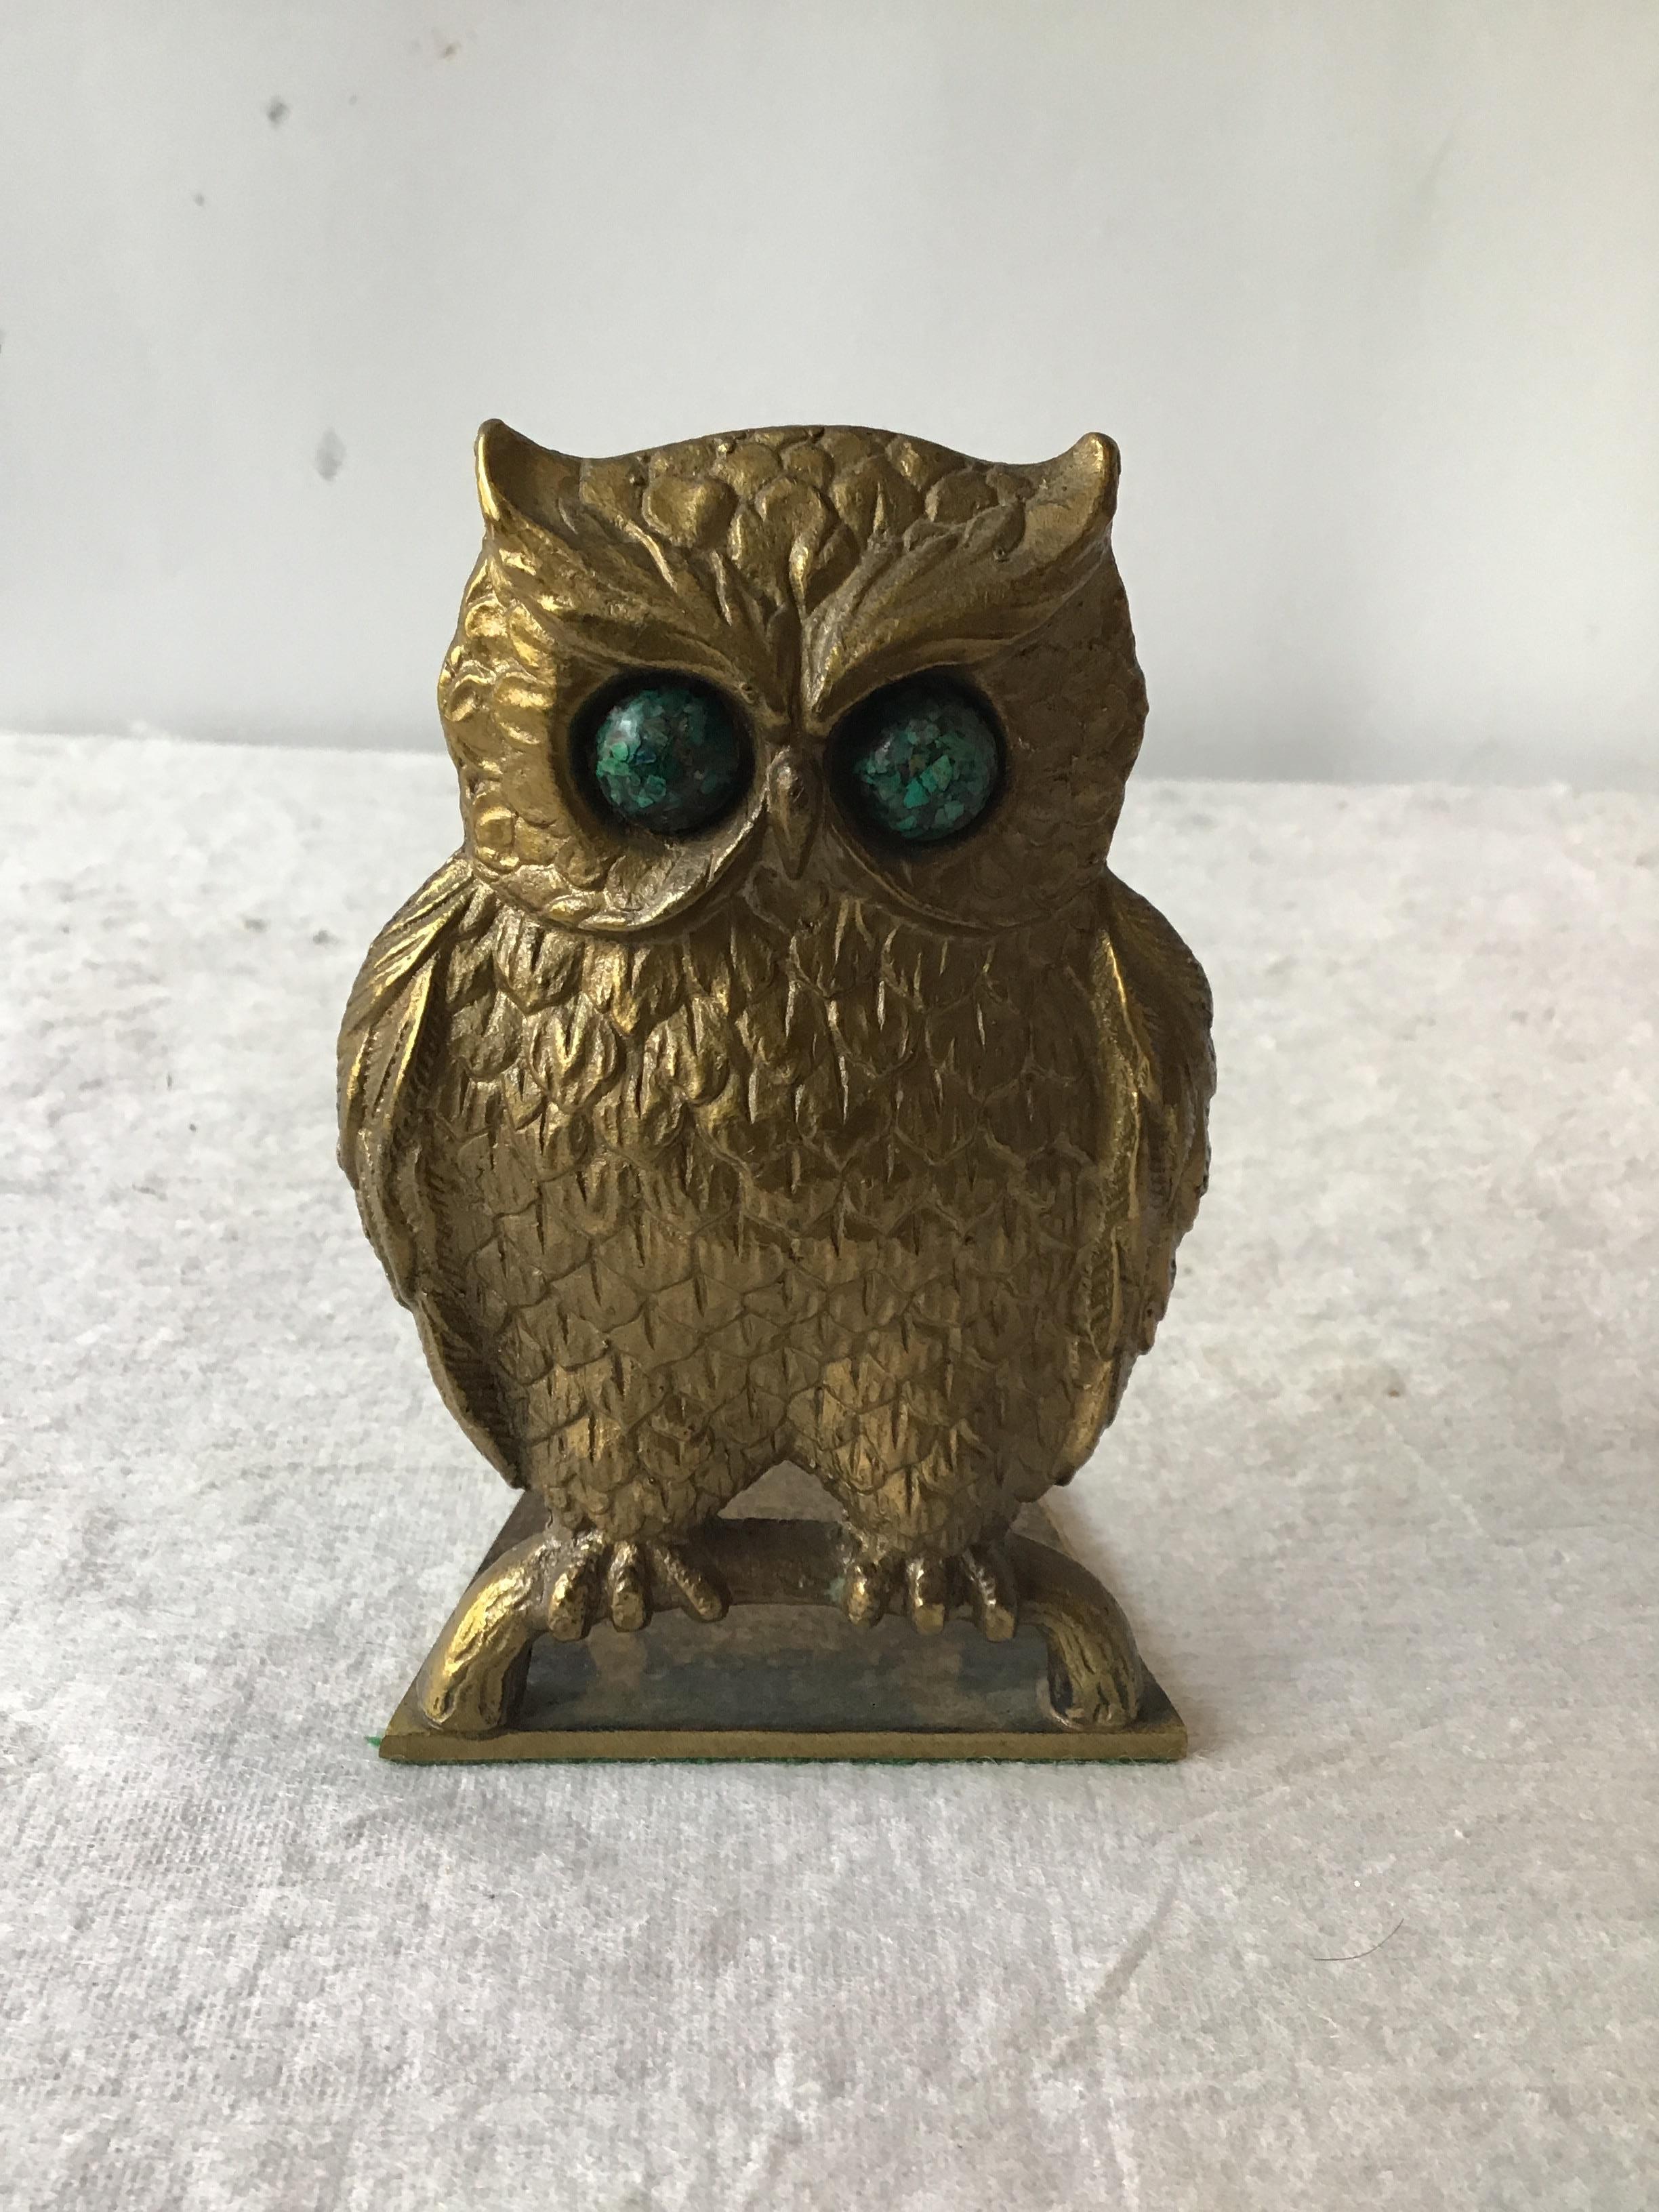 1970s solid brass owl bookends with stone eyes, made in Israel.